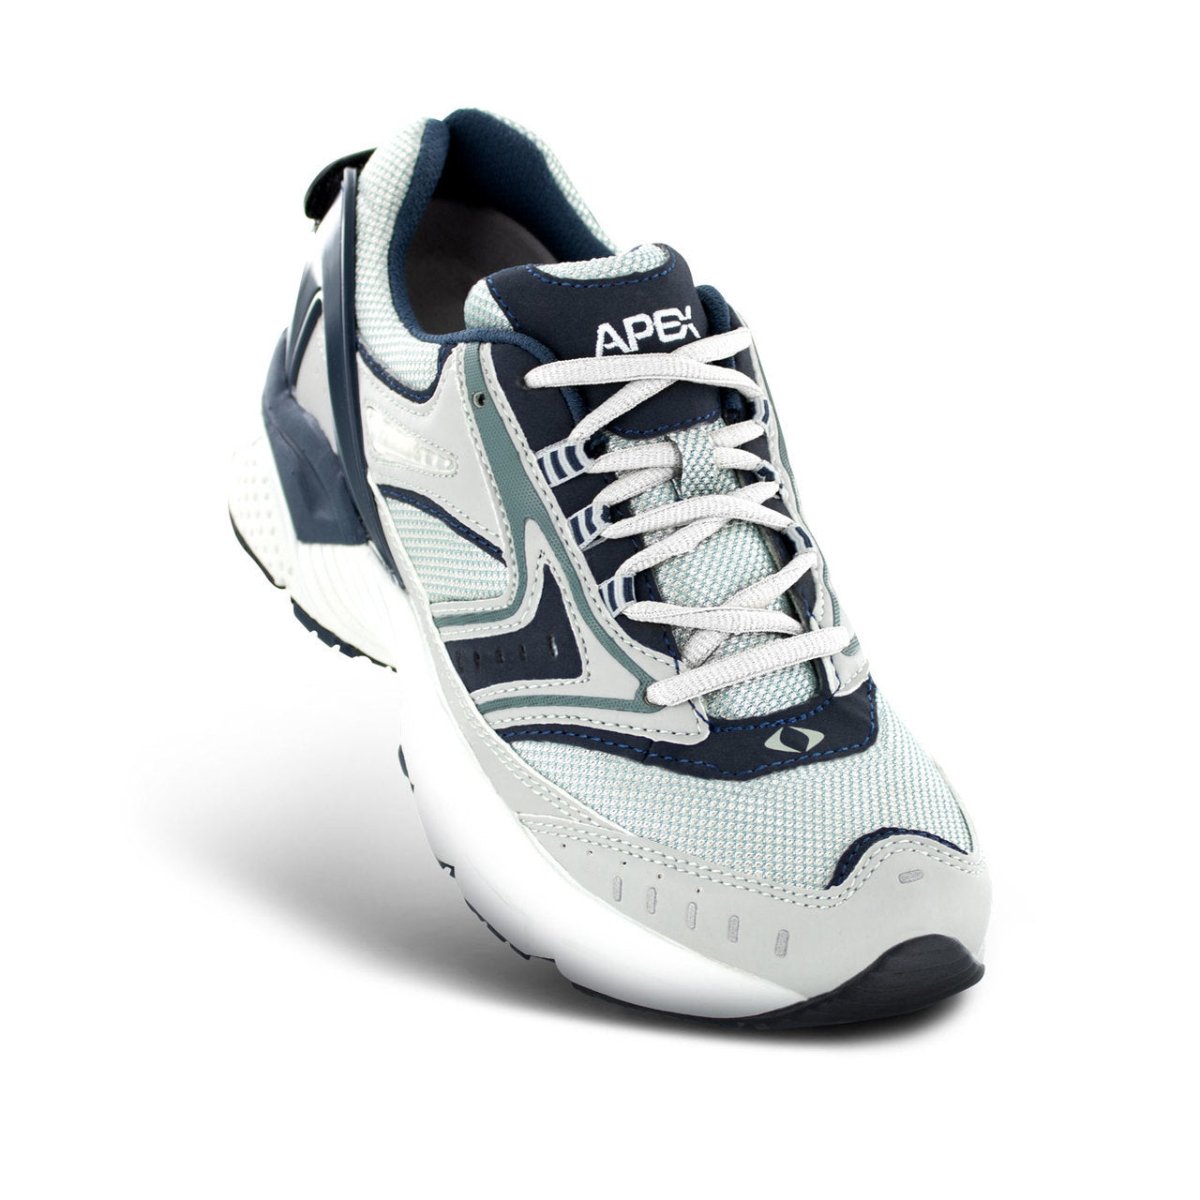 APEX X532M RHINO RUNNER MEN'S ACTIVE SHOE IN SILVER/BLUE - TLW Shoes